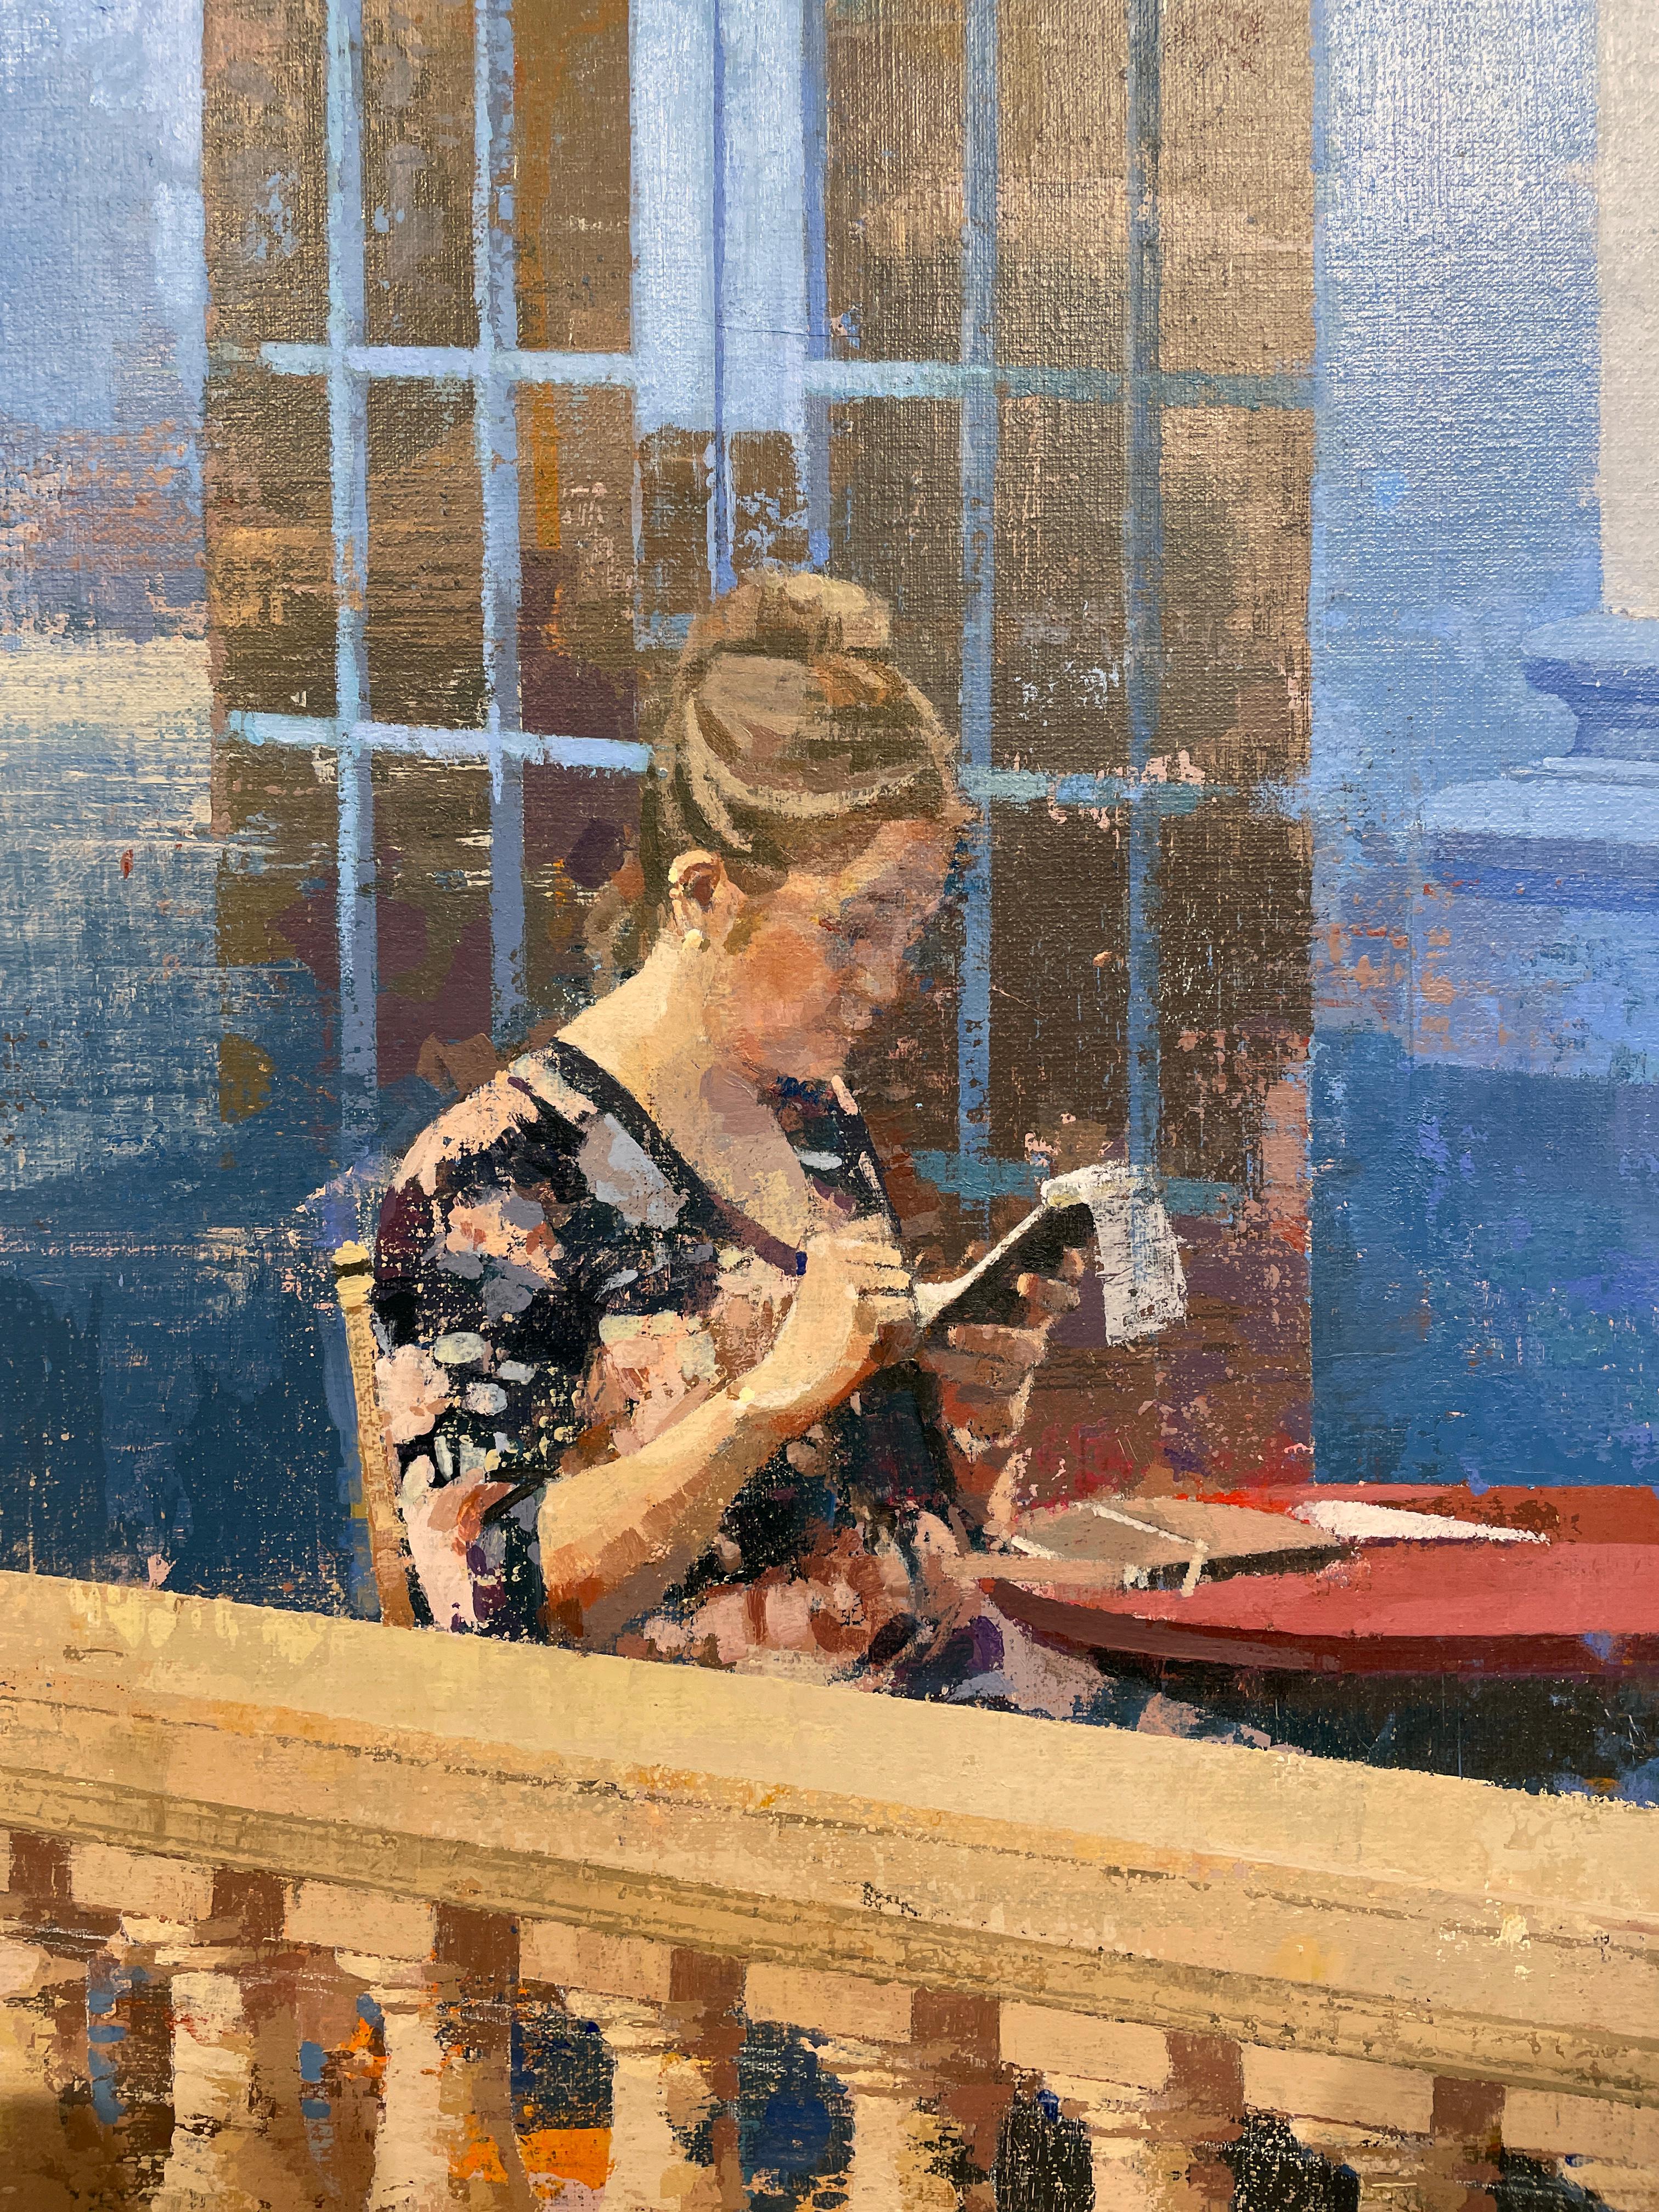 Chicago Theatre - Seated Woman Surrounded by Architectural Detail and Blue Walls - Contemporary Painting by Keiko Ogawa